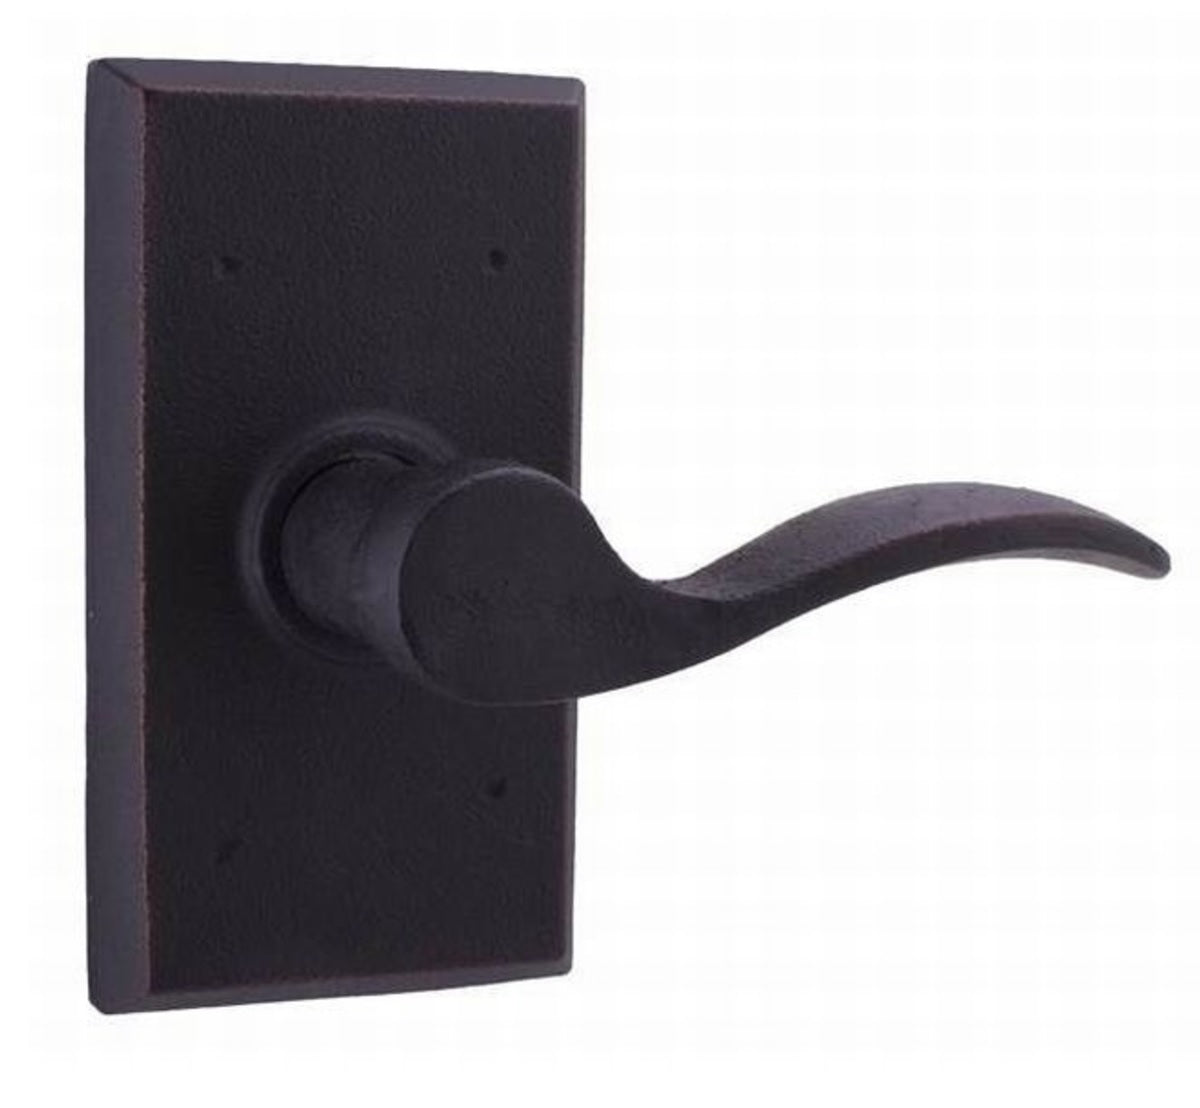 buy passage locksets at cheap rate in bulk. wholesale & retail home hardware equipments store. home décor ideas, maintenance, repair replacement parts